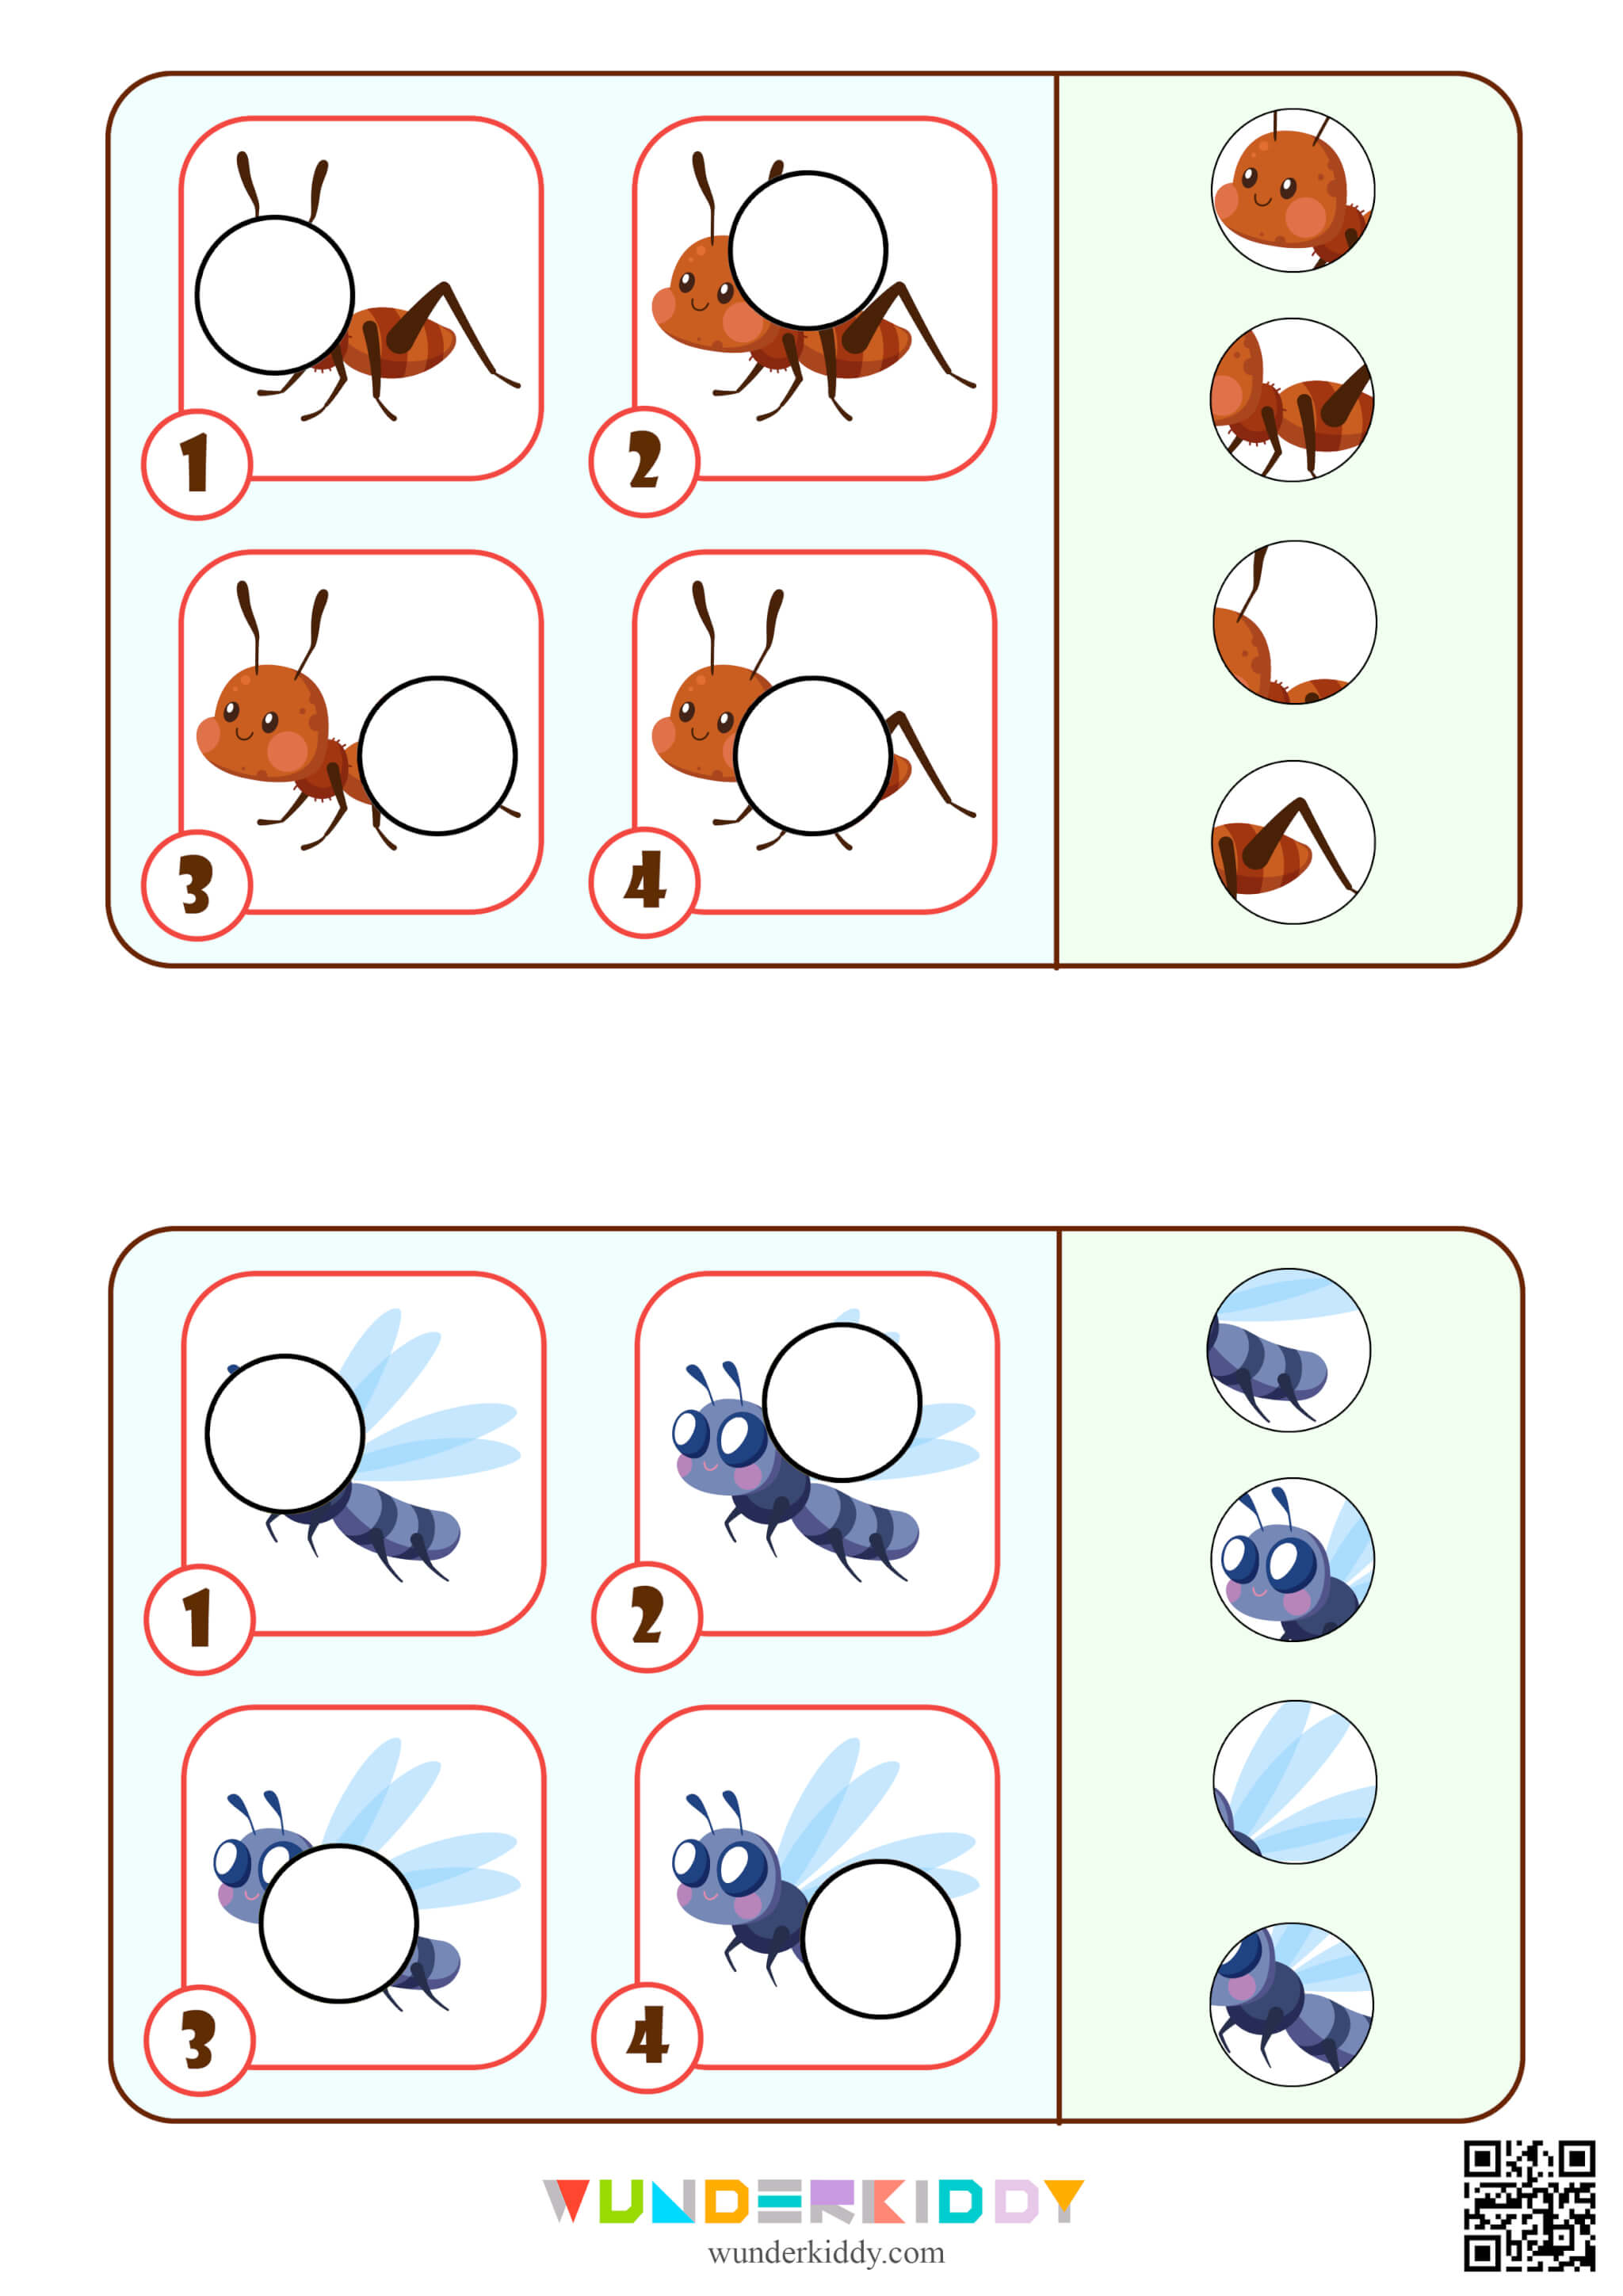 Find Missing Pieces Puzzle Insects - Image 4